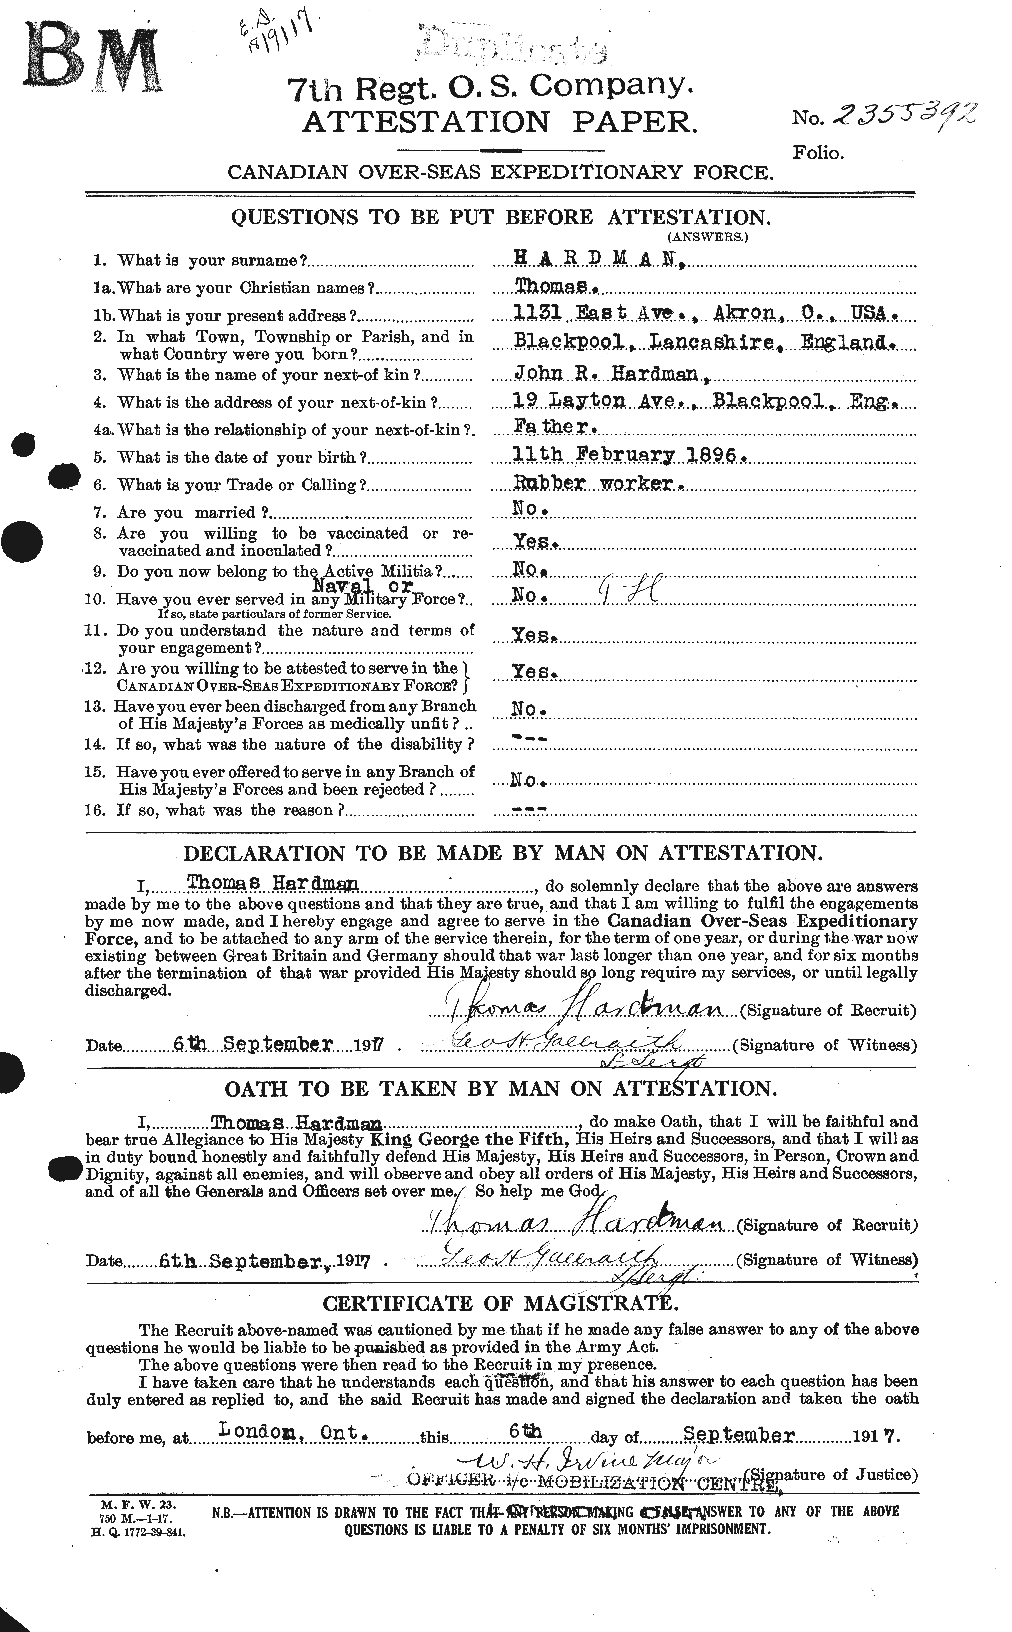 Personnel Records of the First World War - CEF 376506a